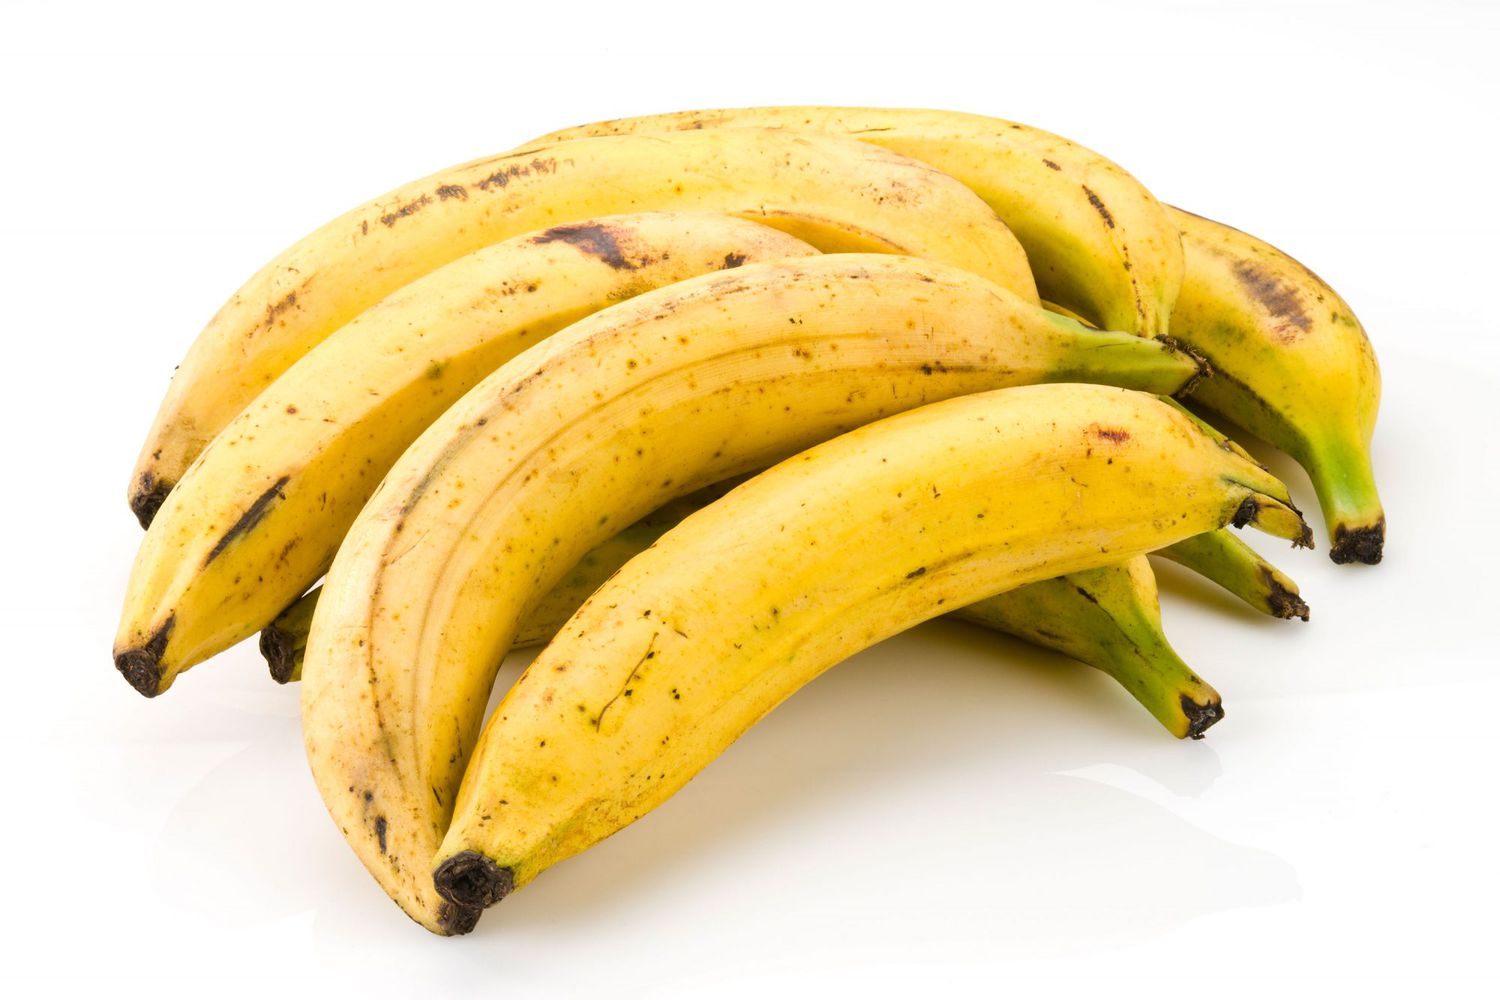 Plantains vs. Bananas: What's the Difference? | Allrecipes